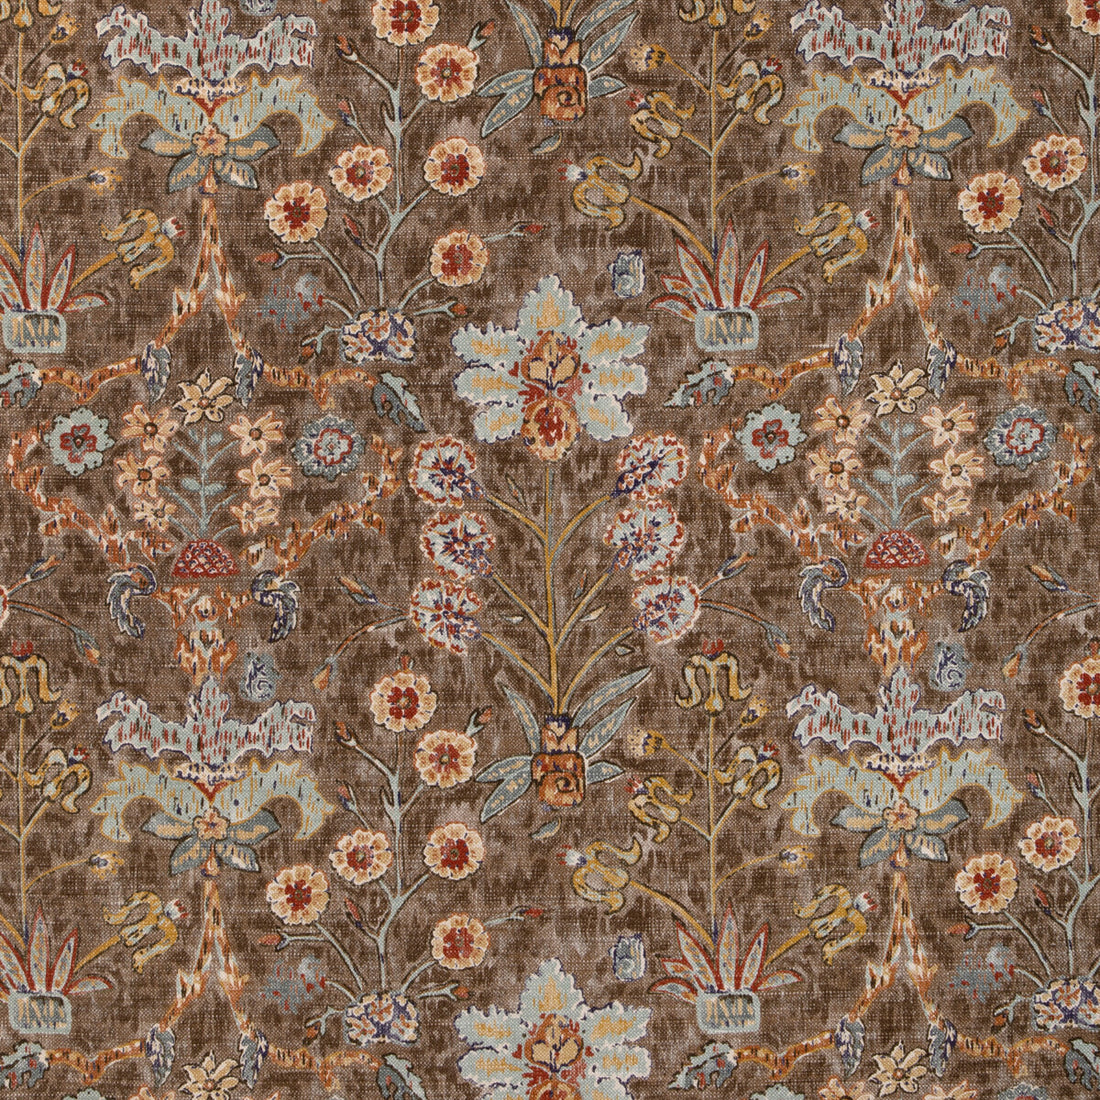 Kerman Print fabric in java/spice color - pattern 2023123.624.0 - by Lee Jofa in the Lee Jofa 200 collection